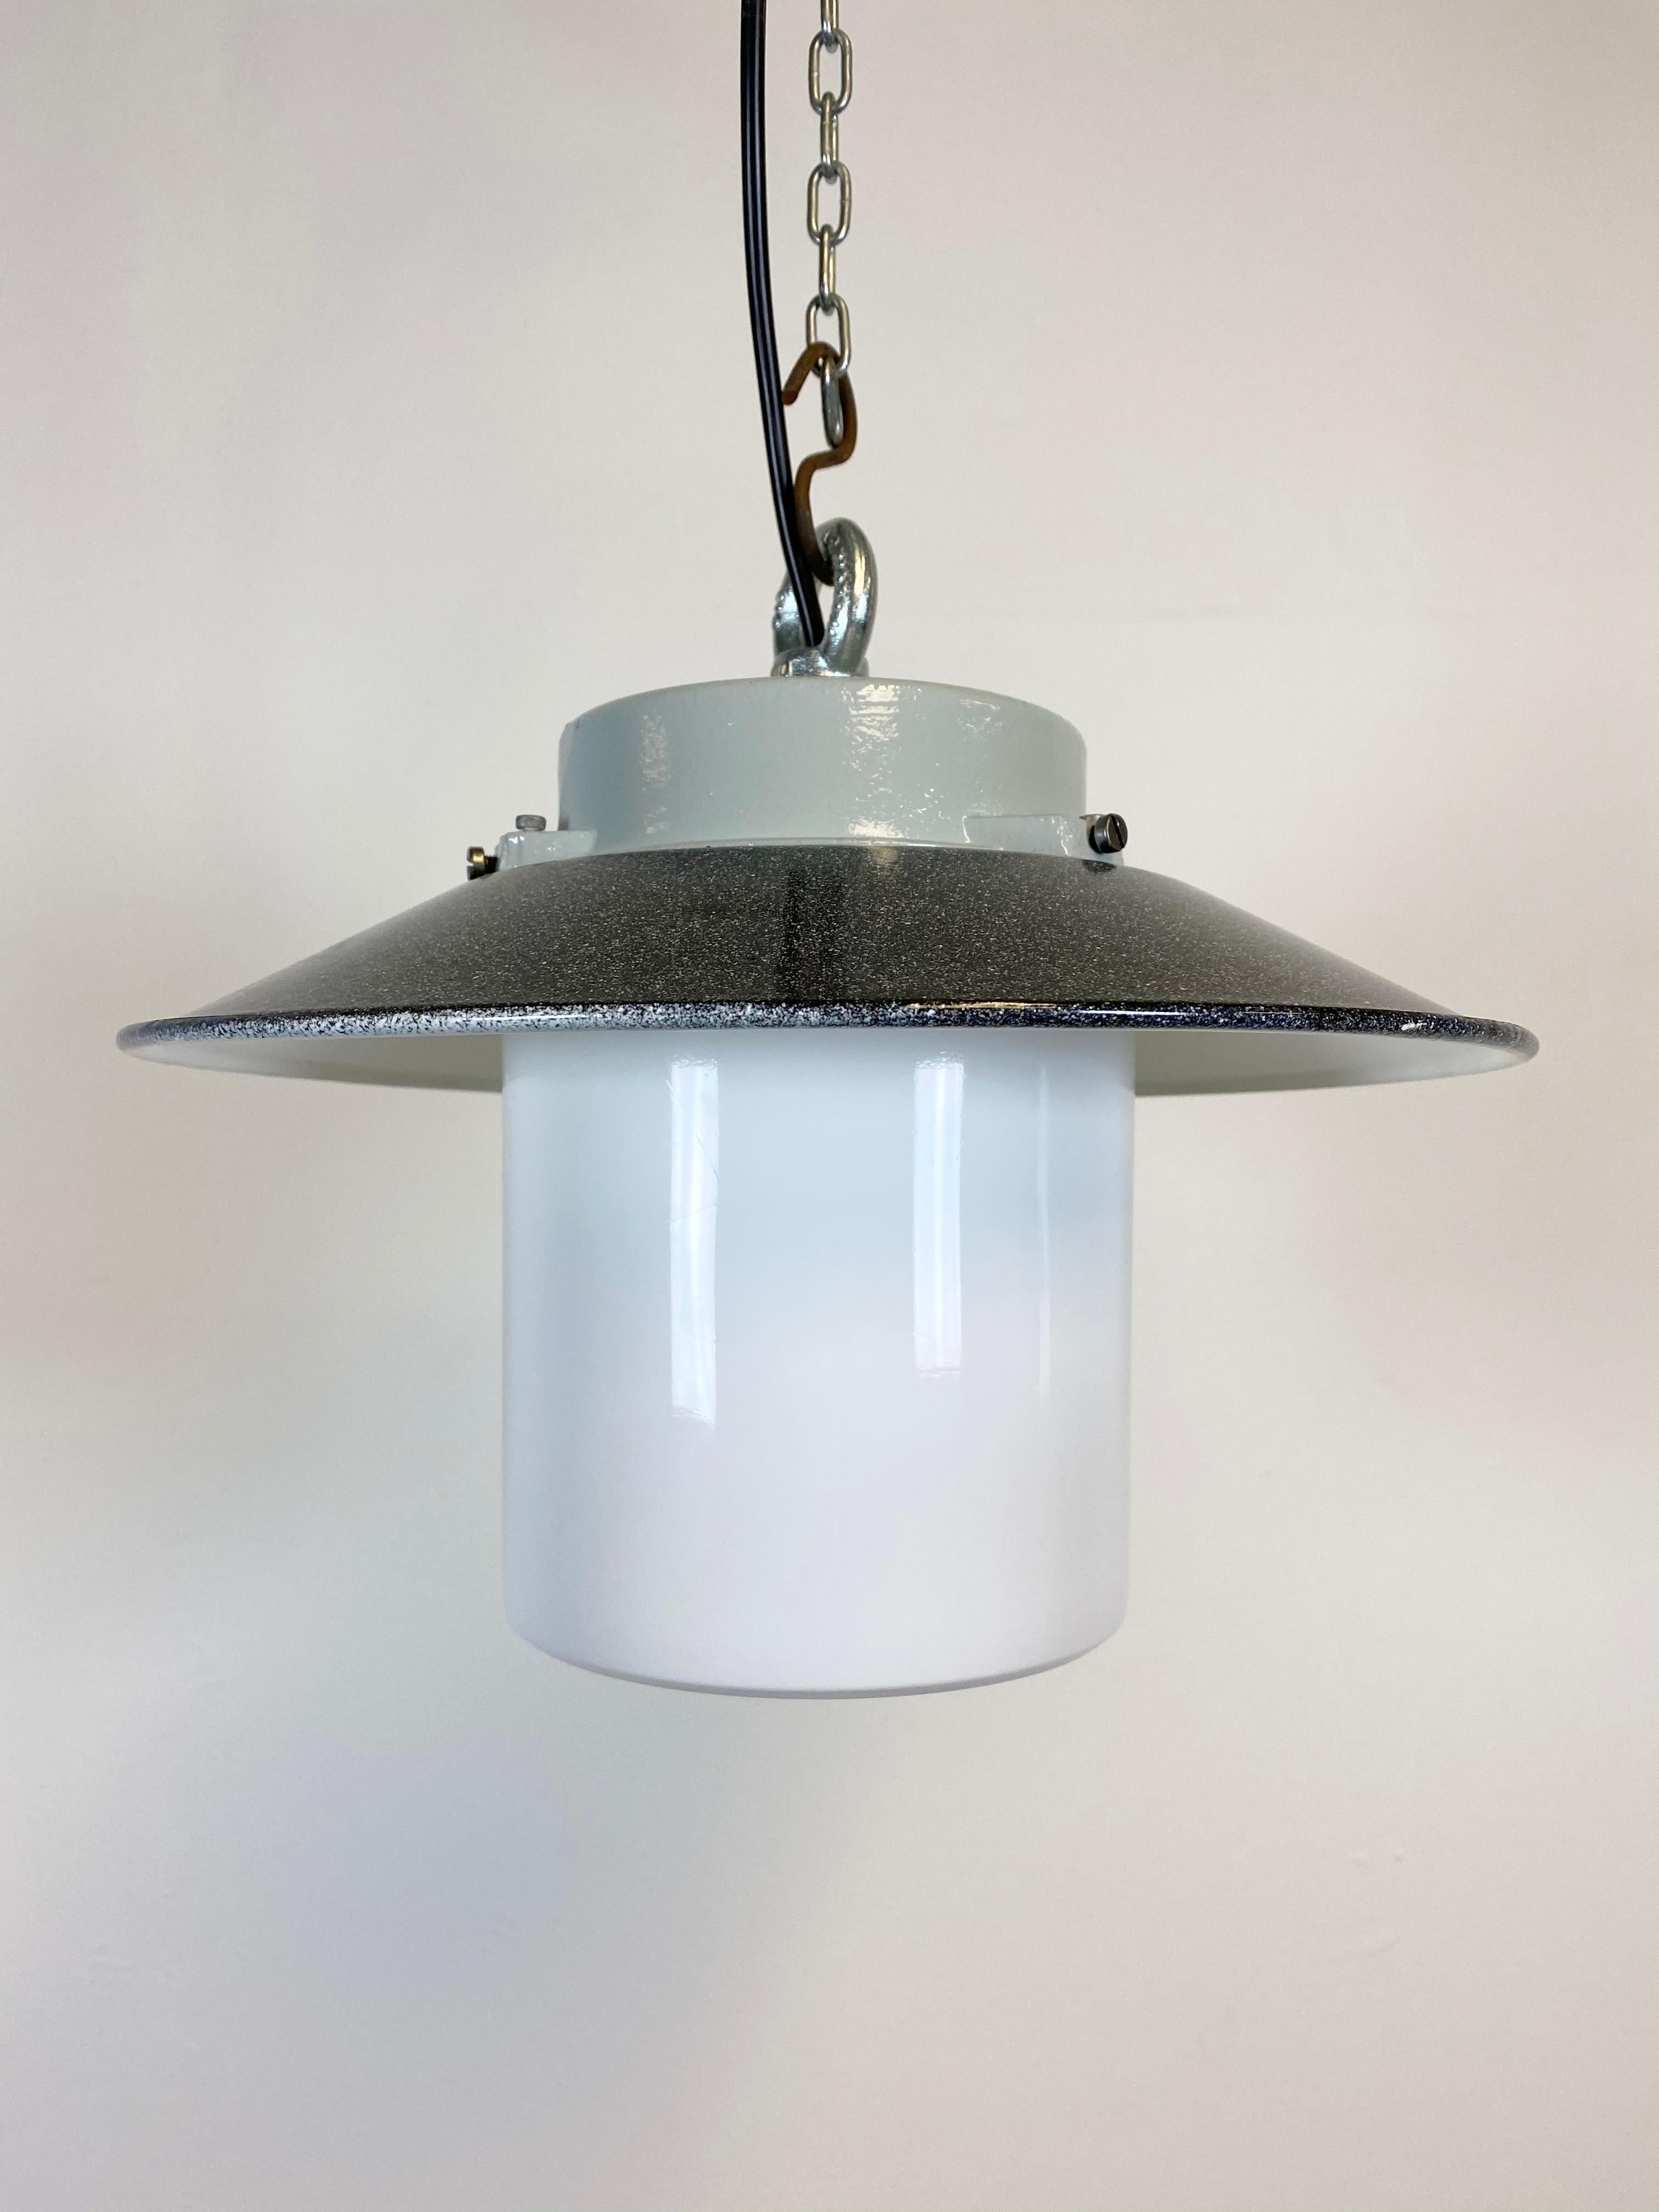 Vintage Industrial lamp from 1970s. Cast aluminium top. Enamel shade. Milk glass. New porcelain socket for E 27 lightbulbs and wire. Weight: 2 kg.